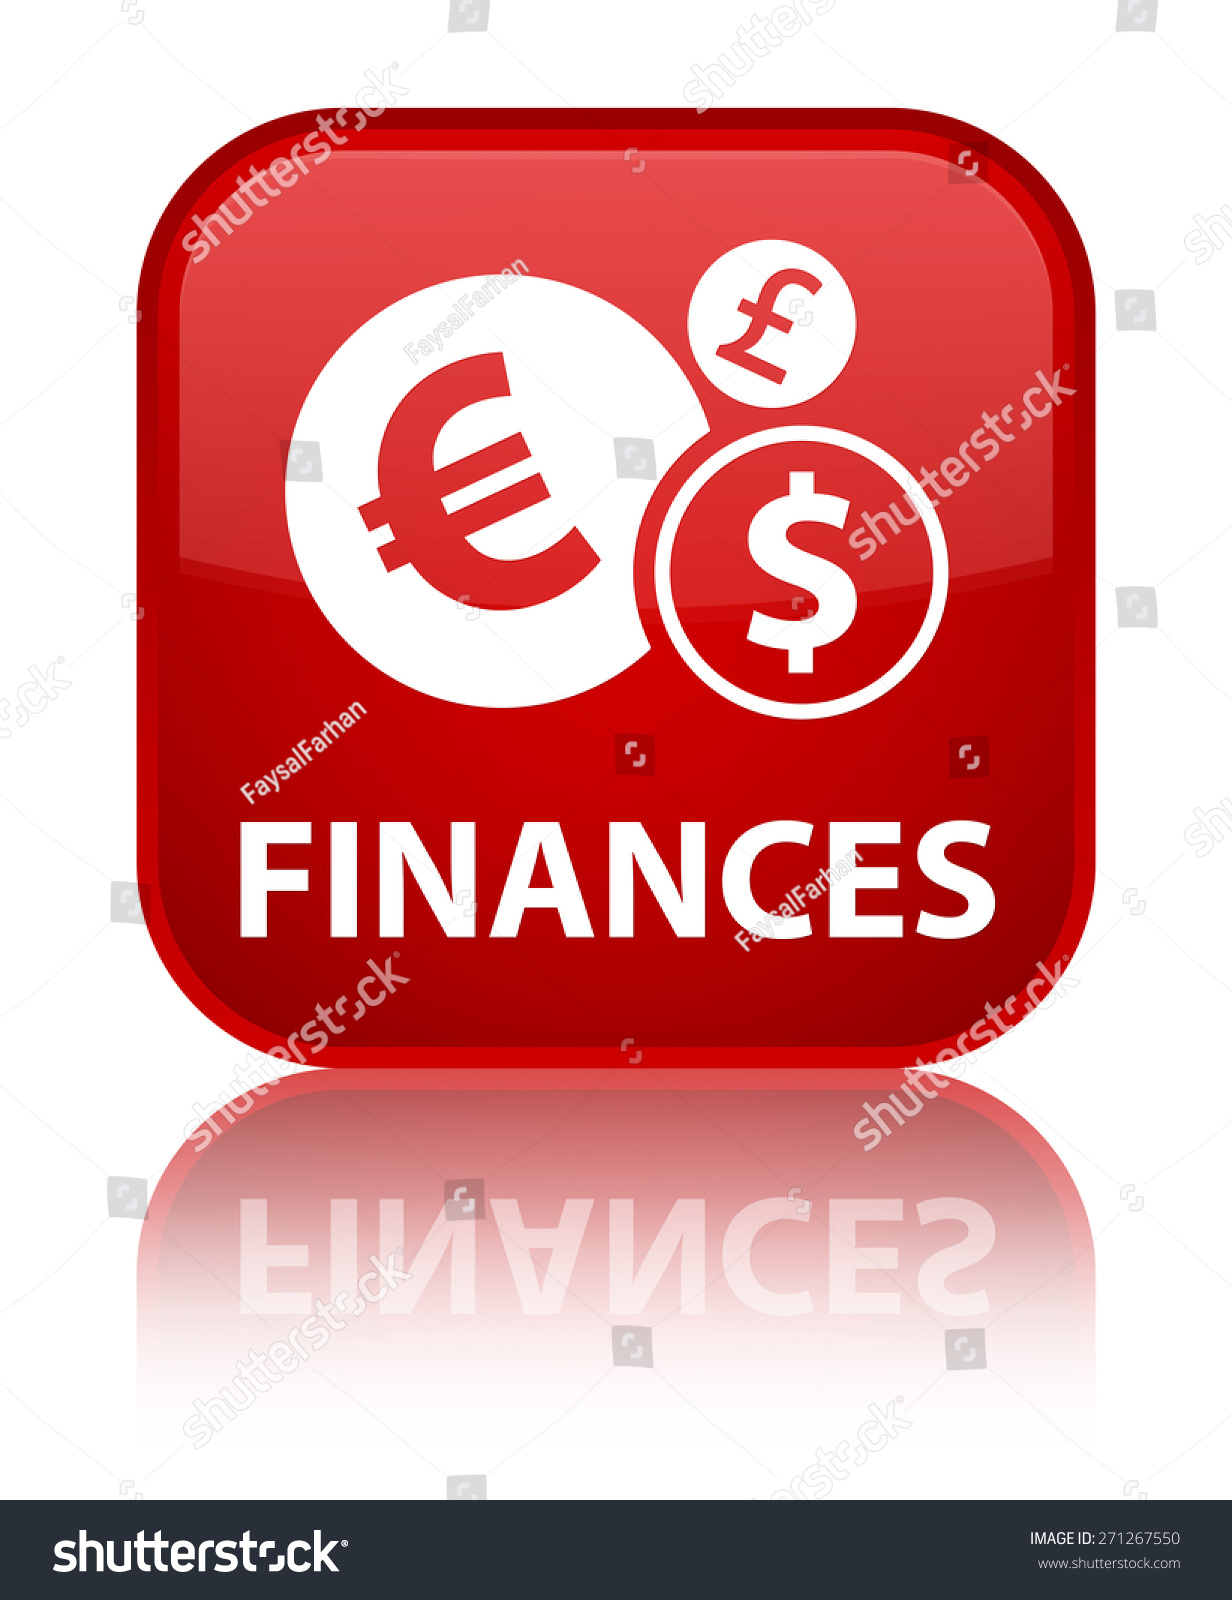 stock-photo-finances-euro-sign-red-square-button-271267550.jpg